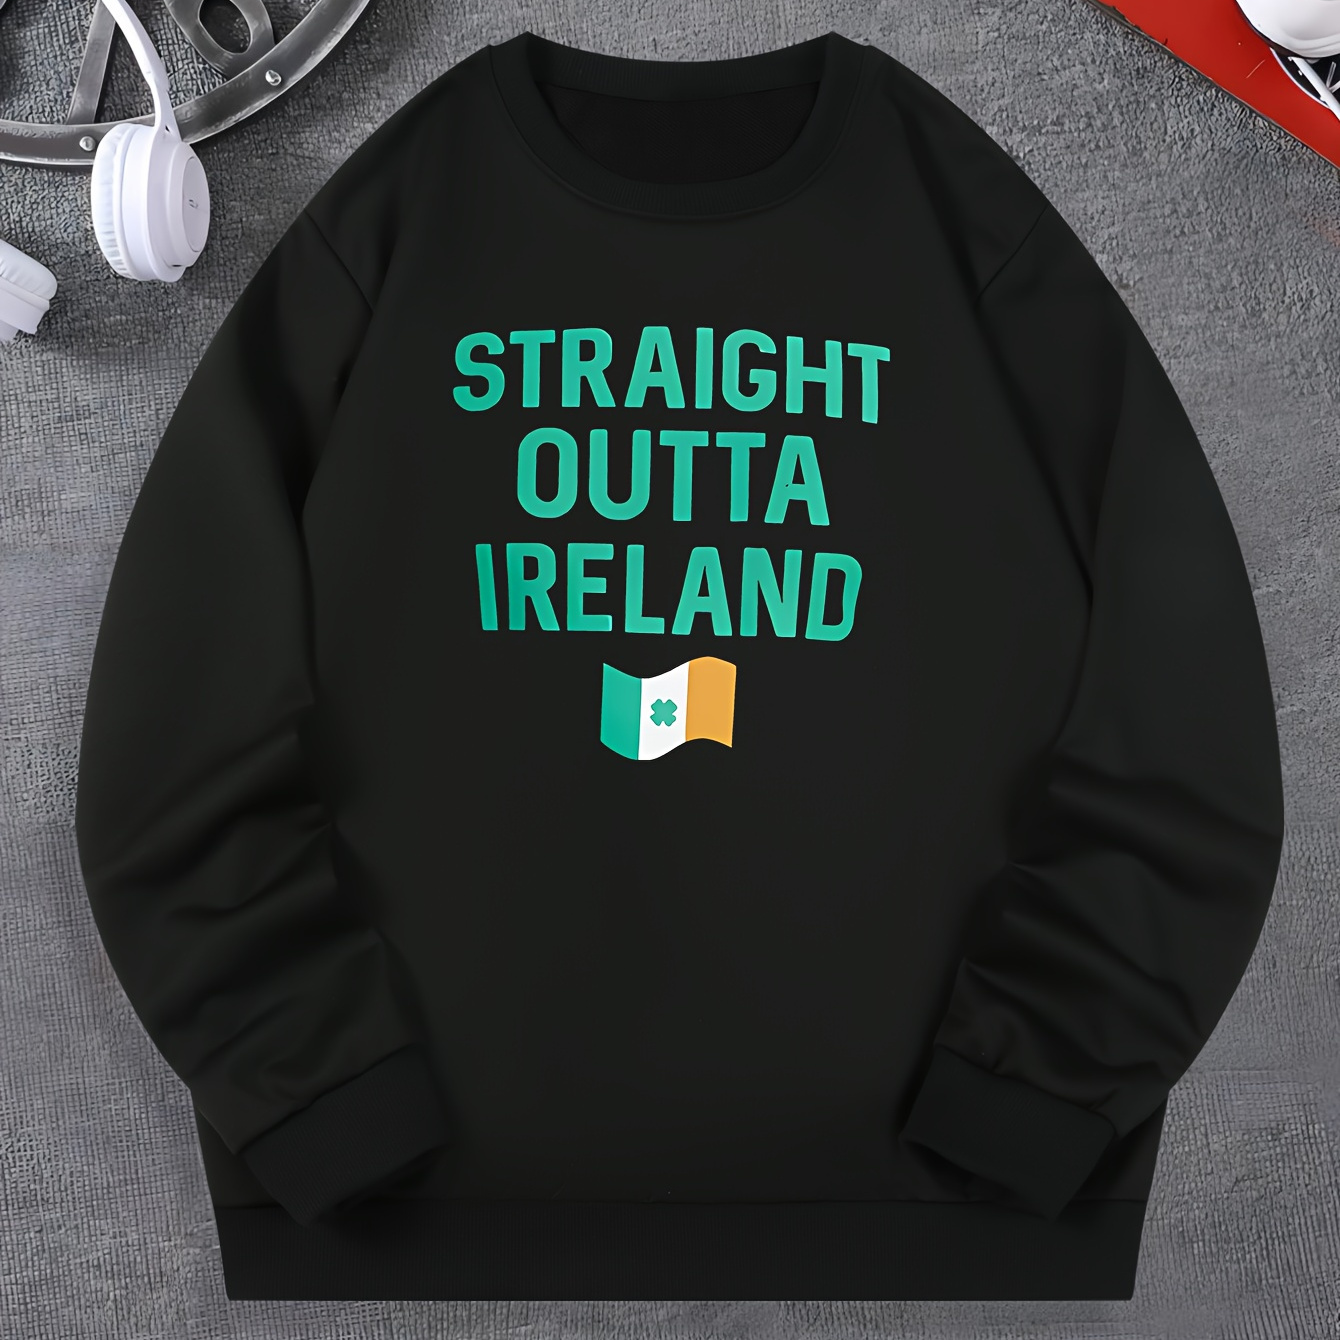 

Straight Outta Ireland And Irish National Flag Graphic Print, Men's Trendy Sweatshirt, Casual Comfy Pullover With Crew Neck For Men For Fall And Winter